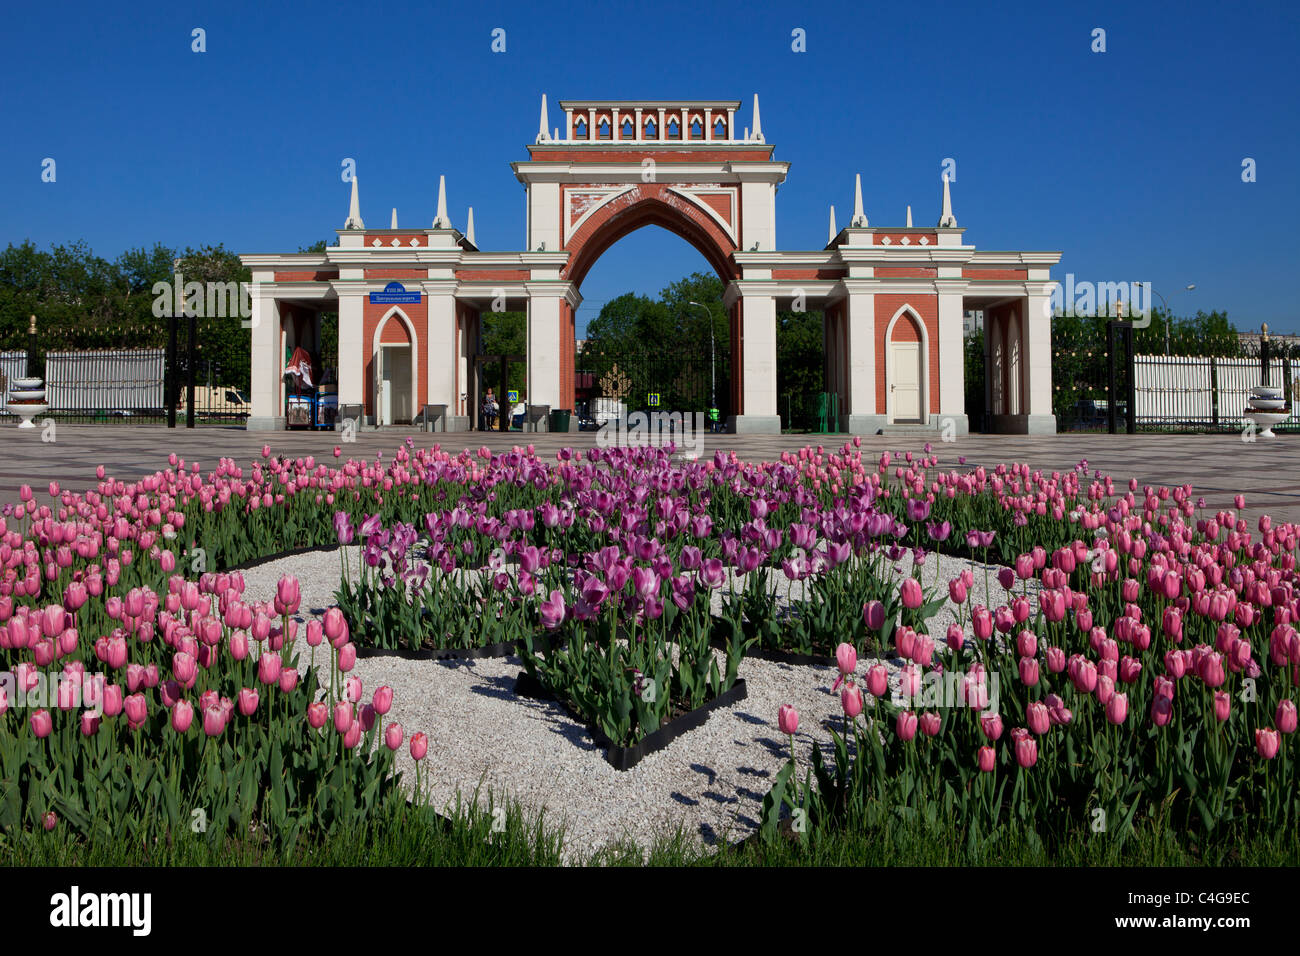 The main entrance to the 18th century Neo-Gothic (Gothic Revival) Tsaritsyno Estate in Moscow, Russia Stock Photo